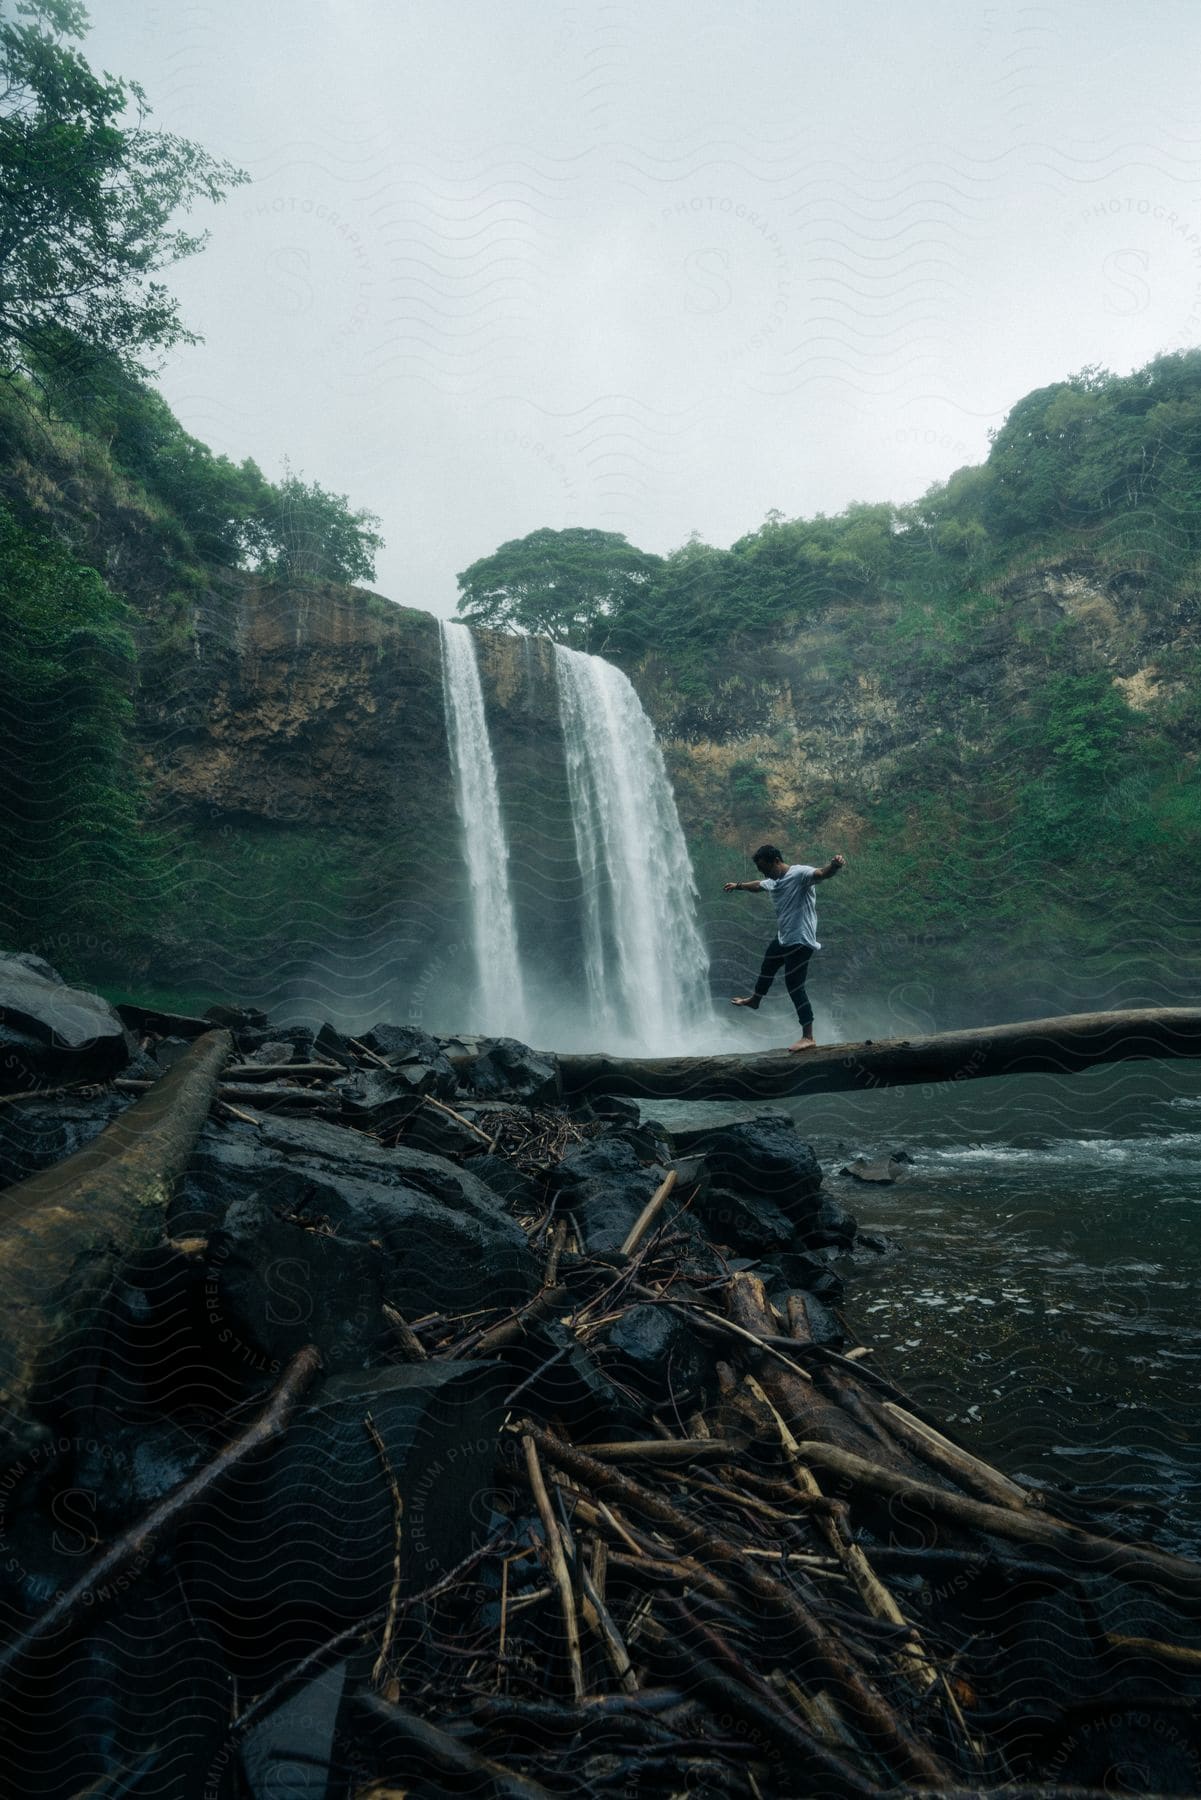 A young adult man balances on a fallen tree trunk over a river in front of a waterfall